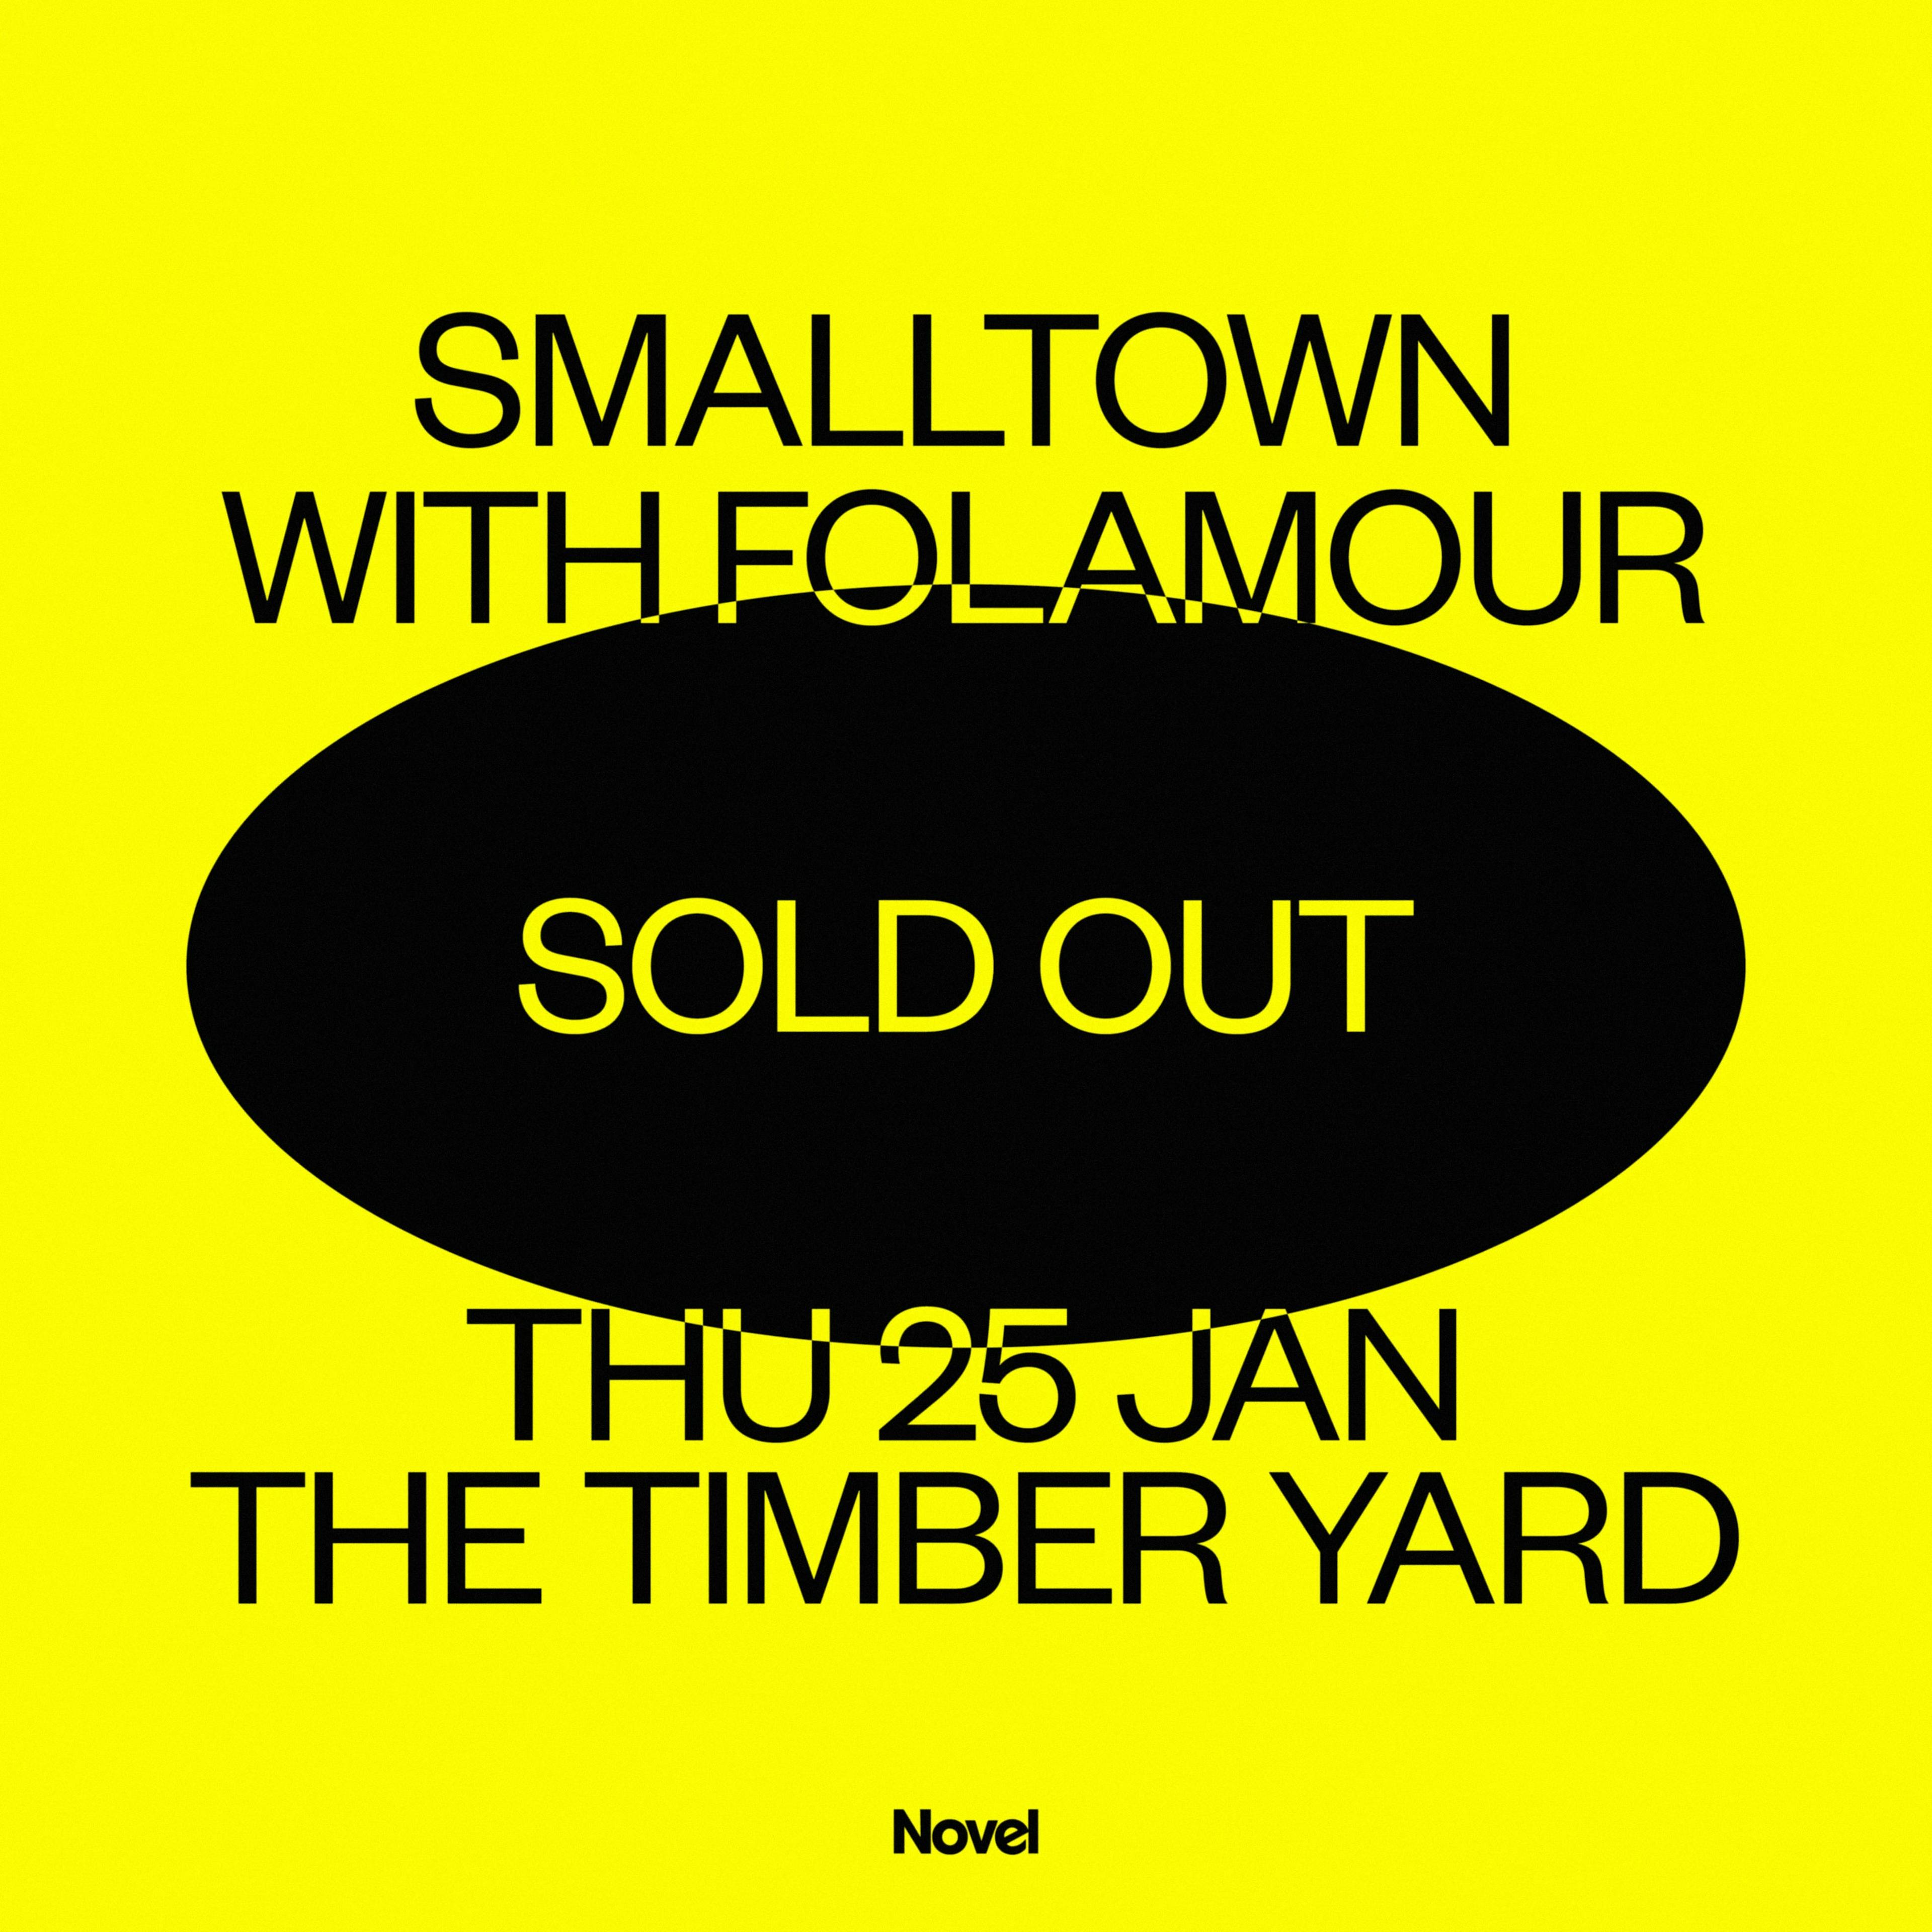 SOLD OUT - smalltown with Folamour, Dam Swindle + Laurence Guy (Public Holiday Eve)